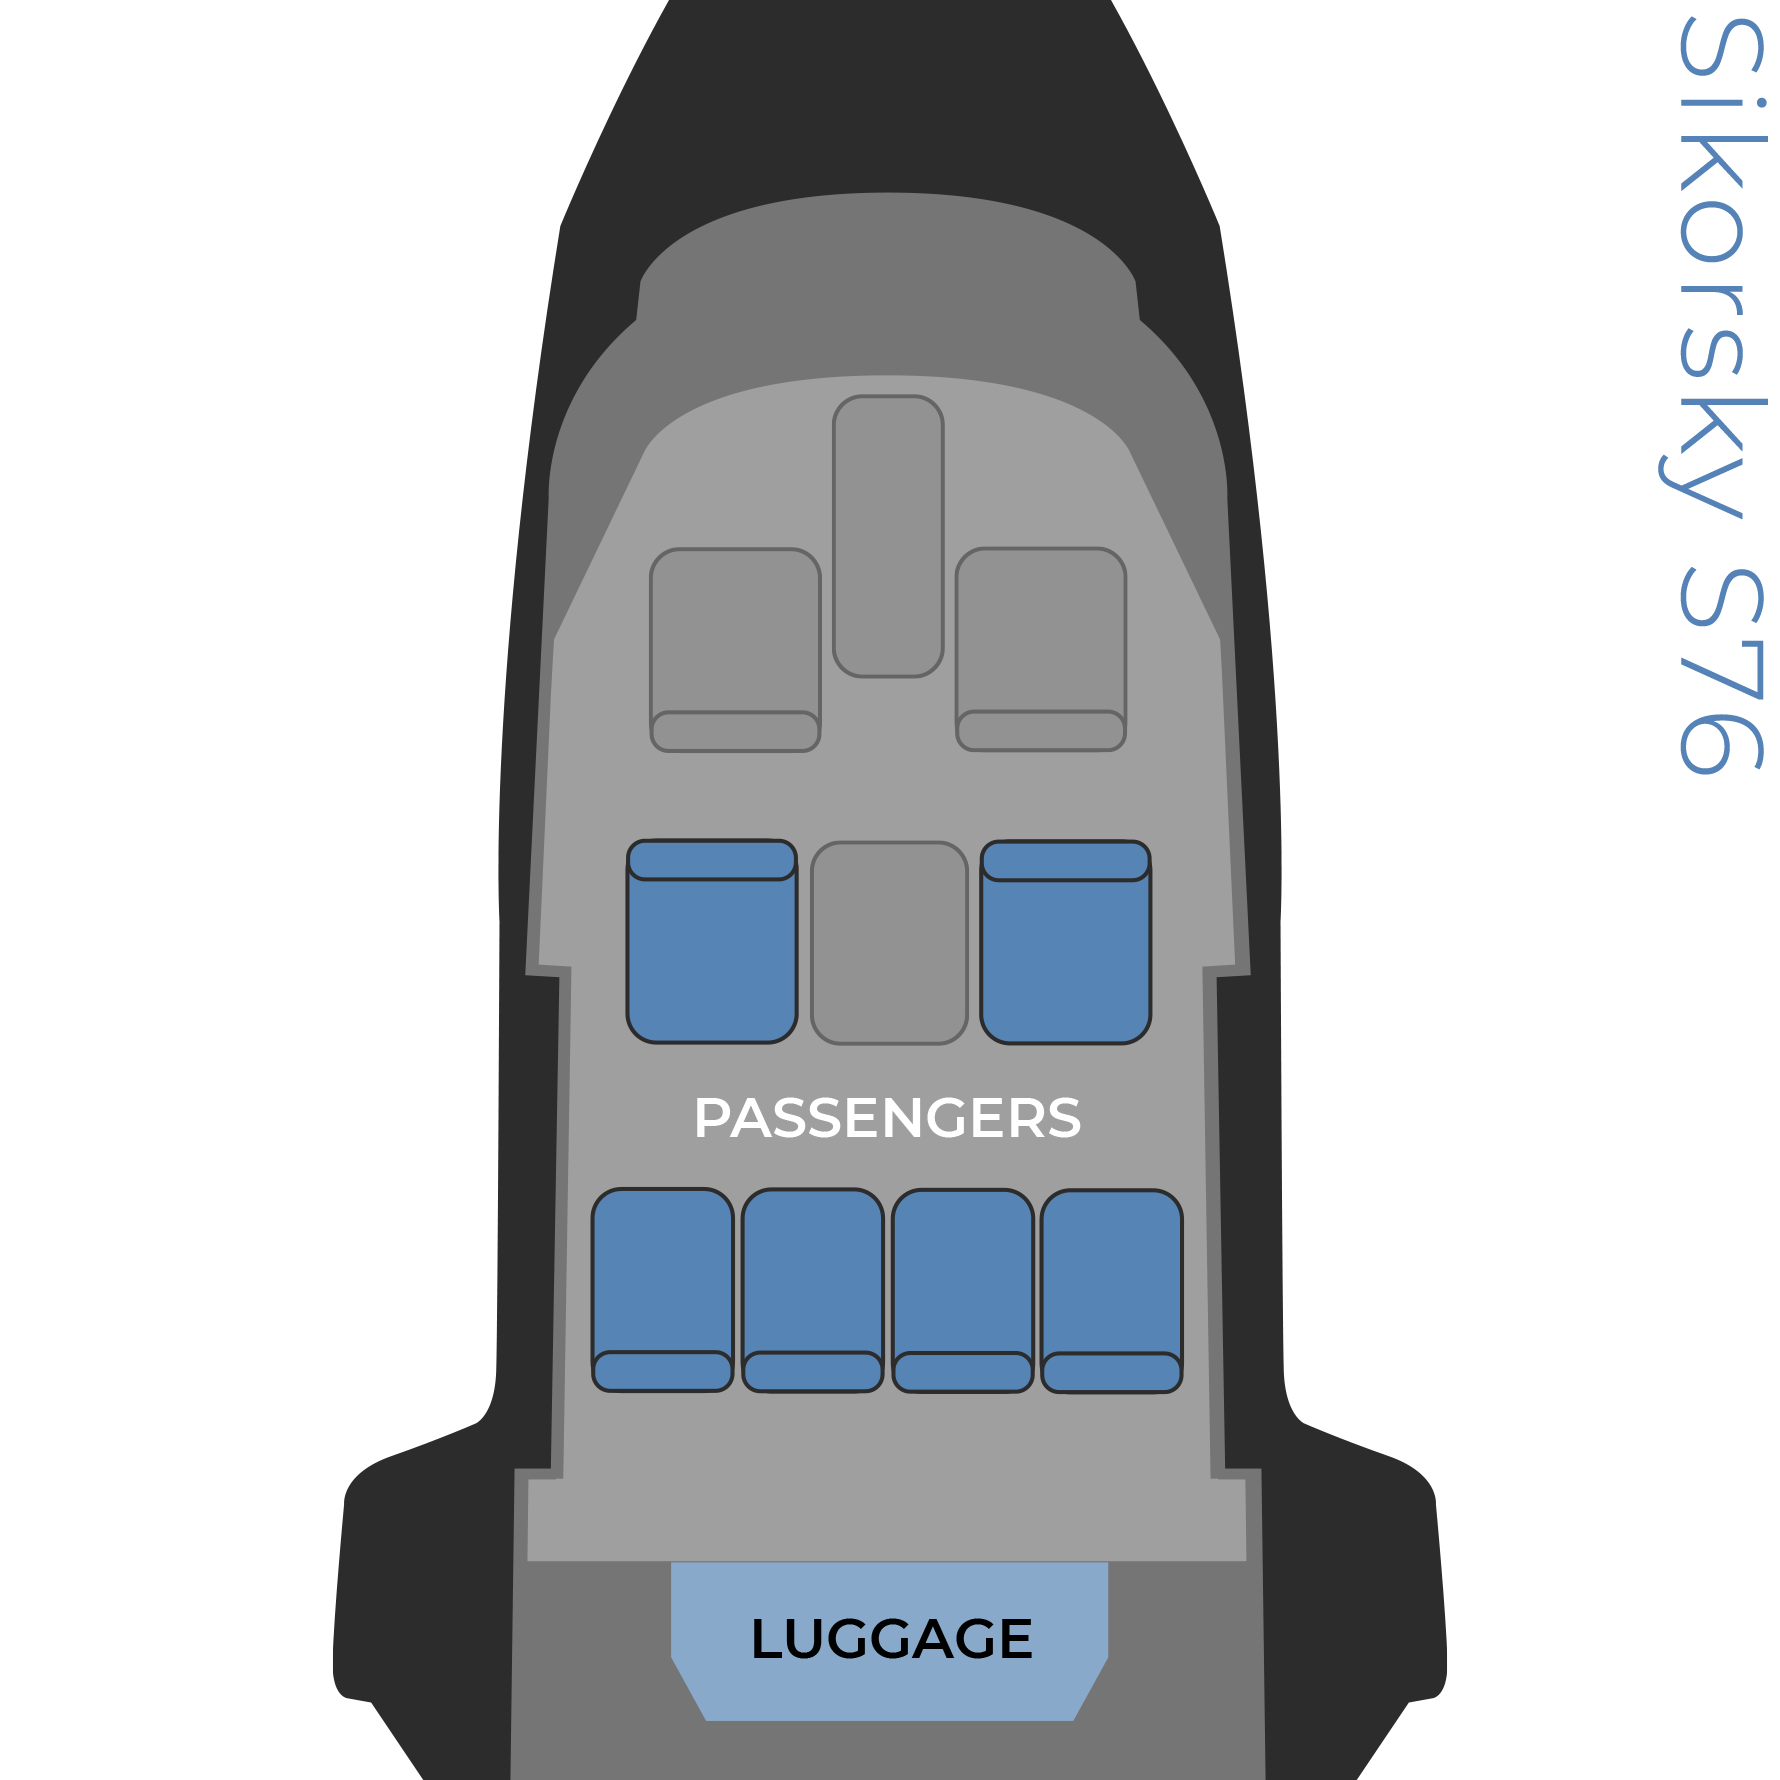 Sikorsky S76 seat configuration image